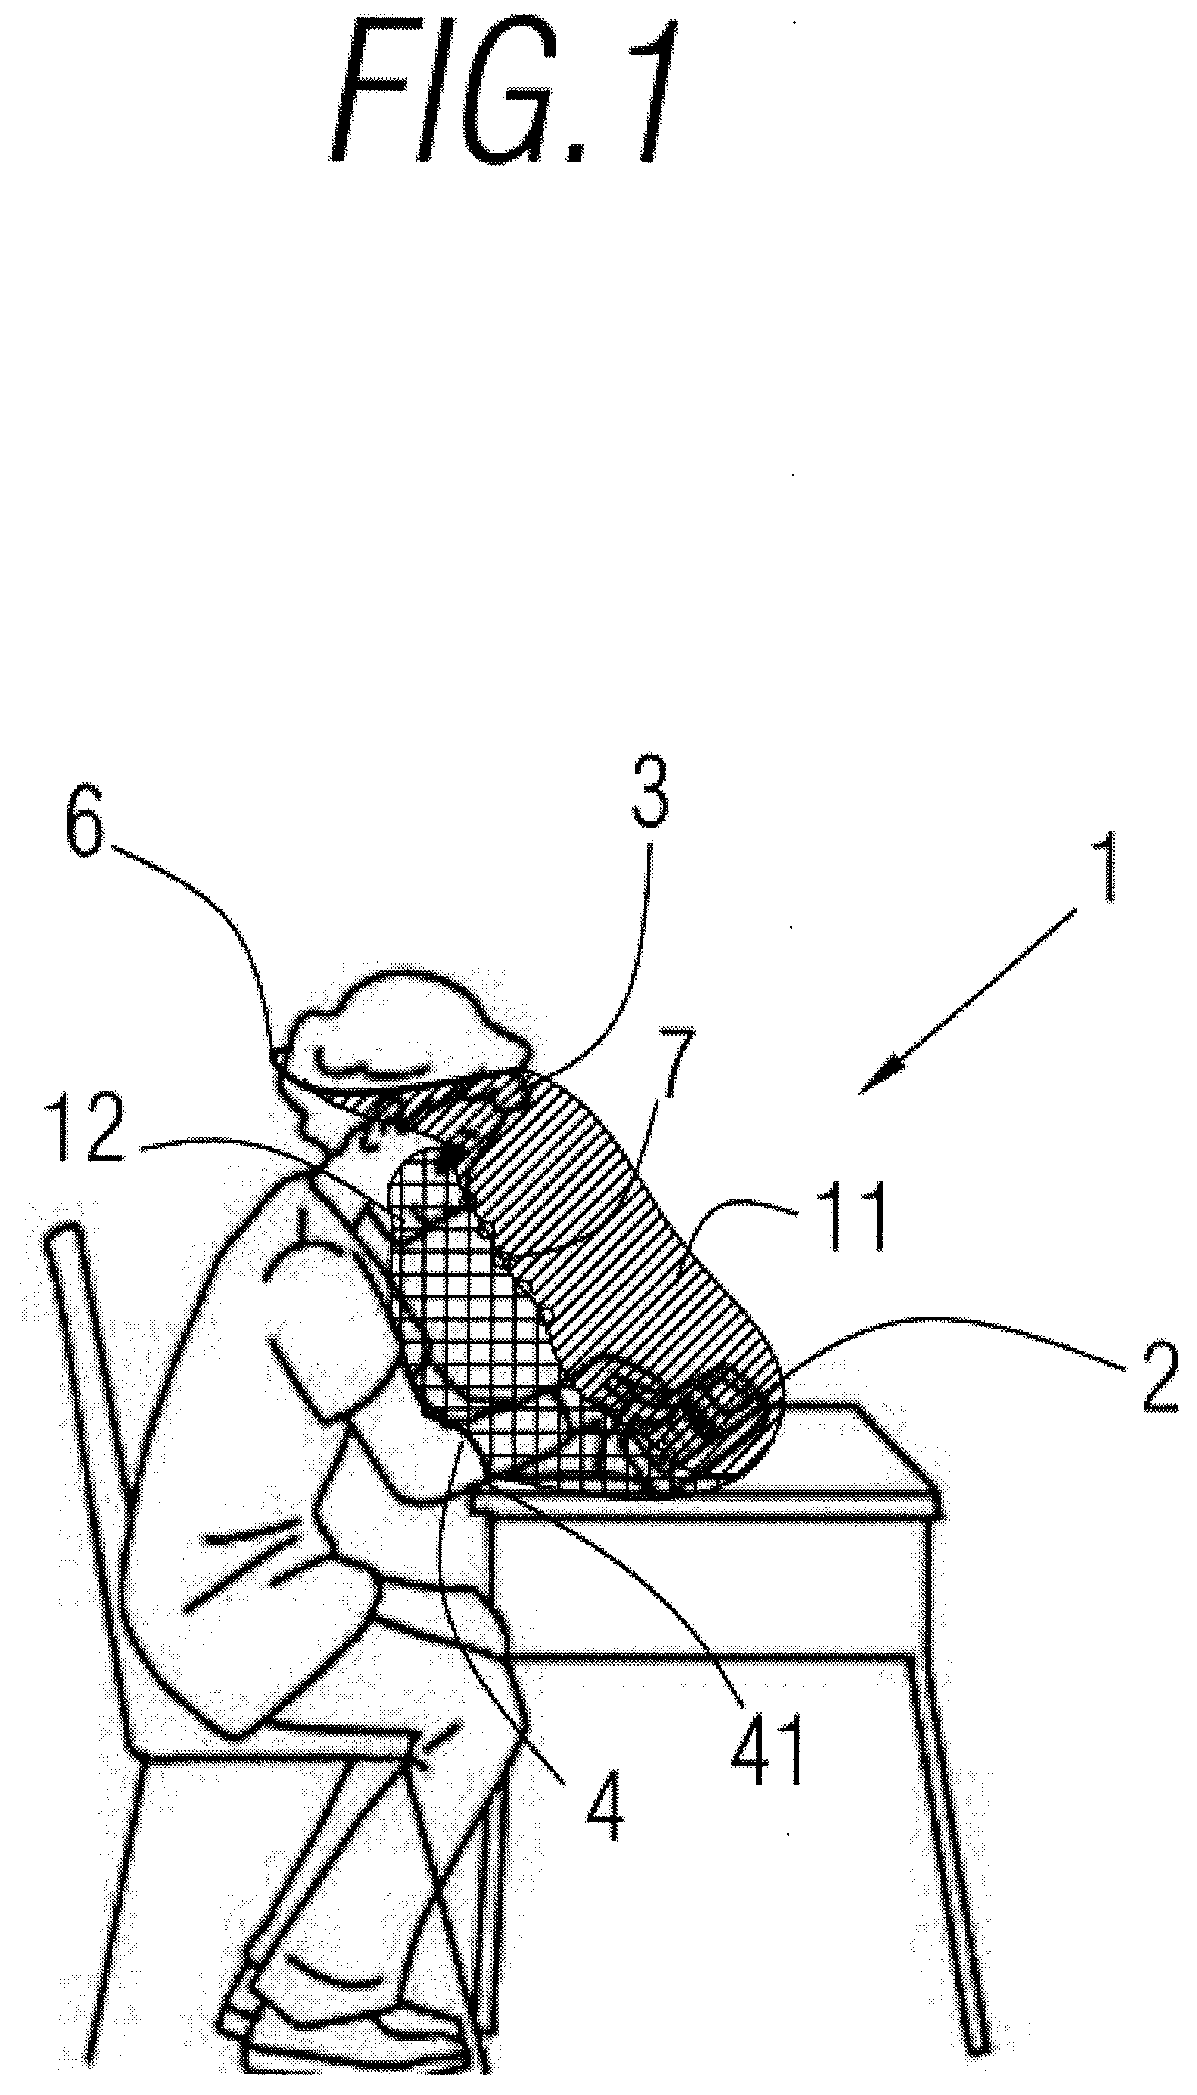 Accessory for portable electronic device